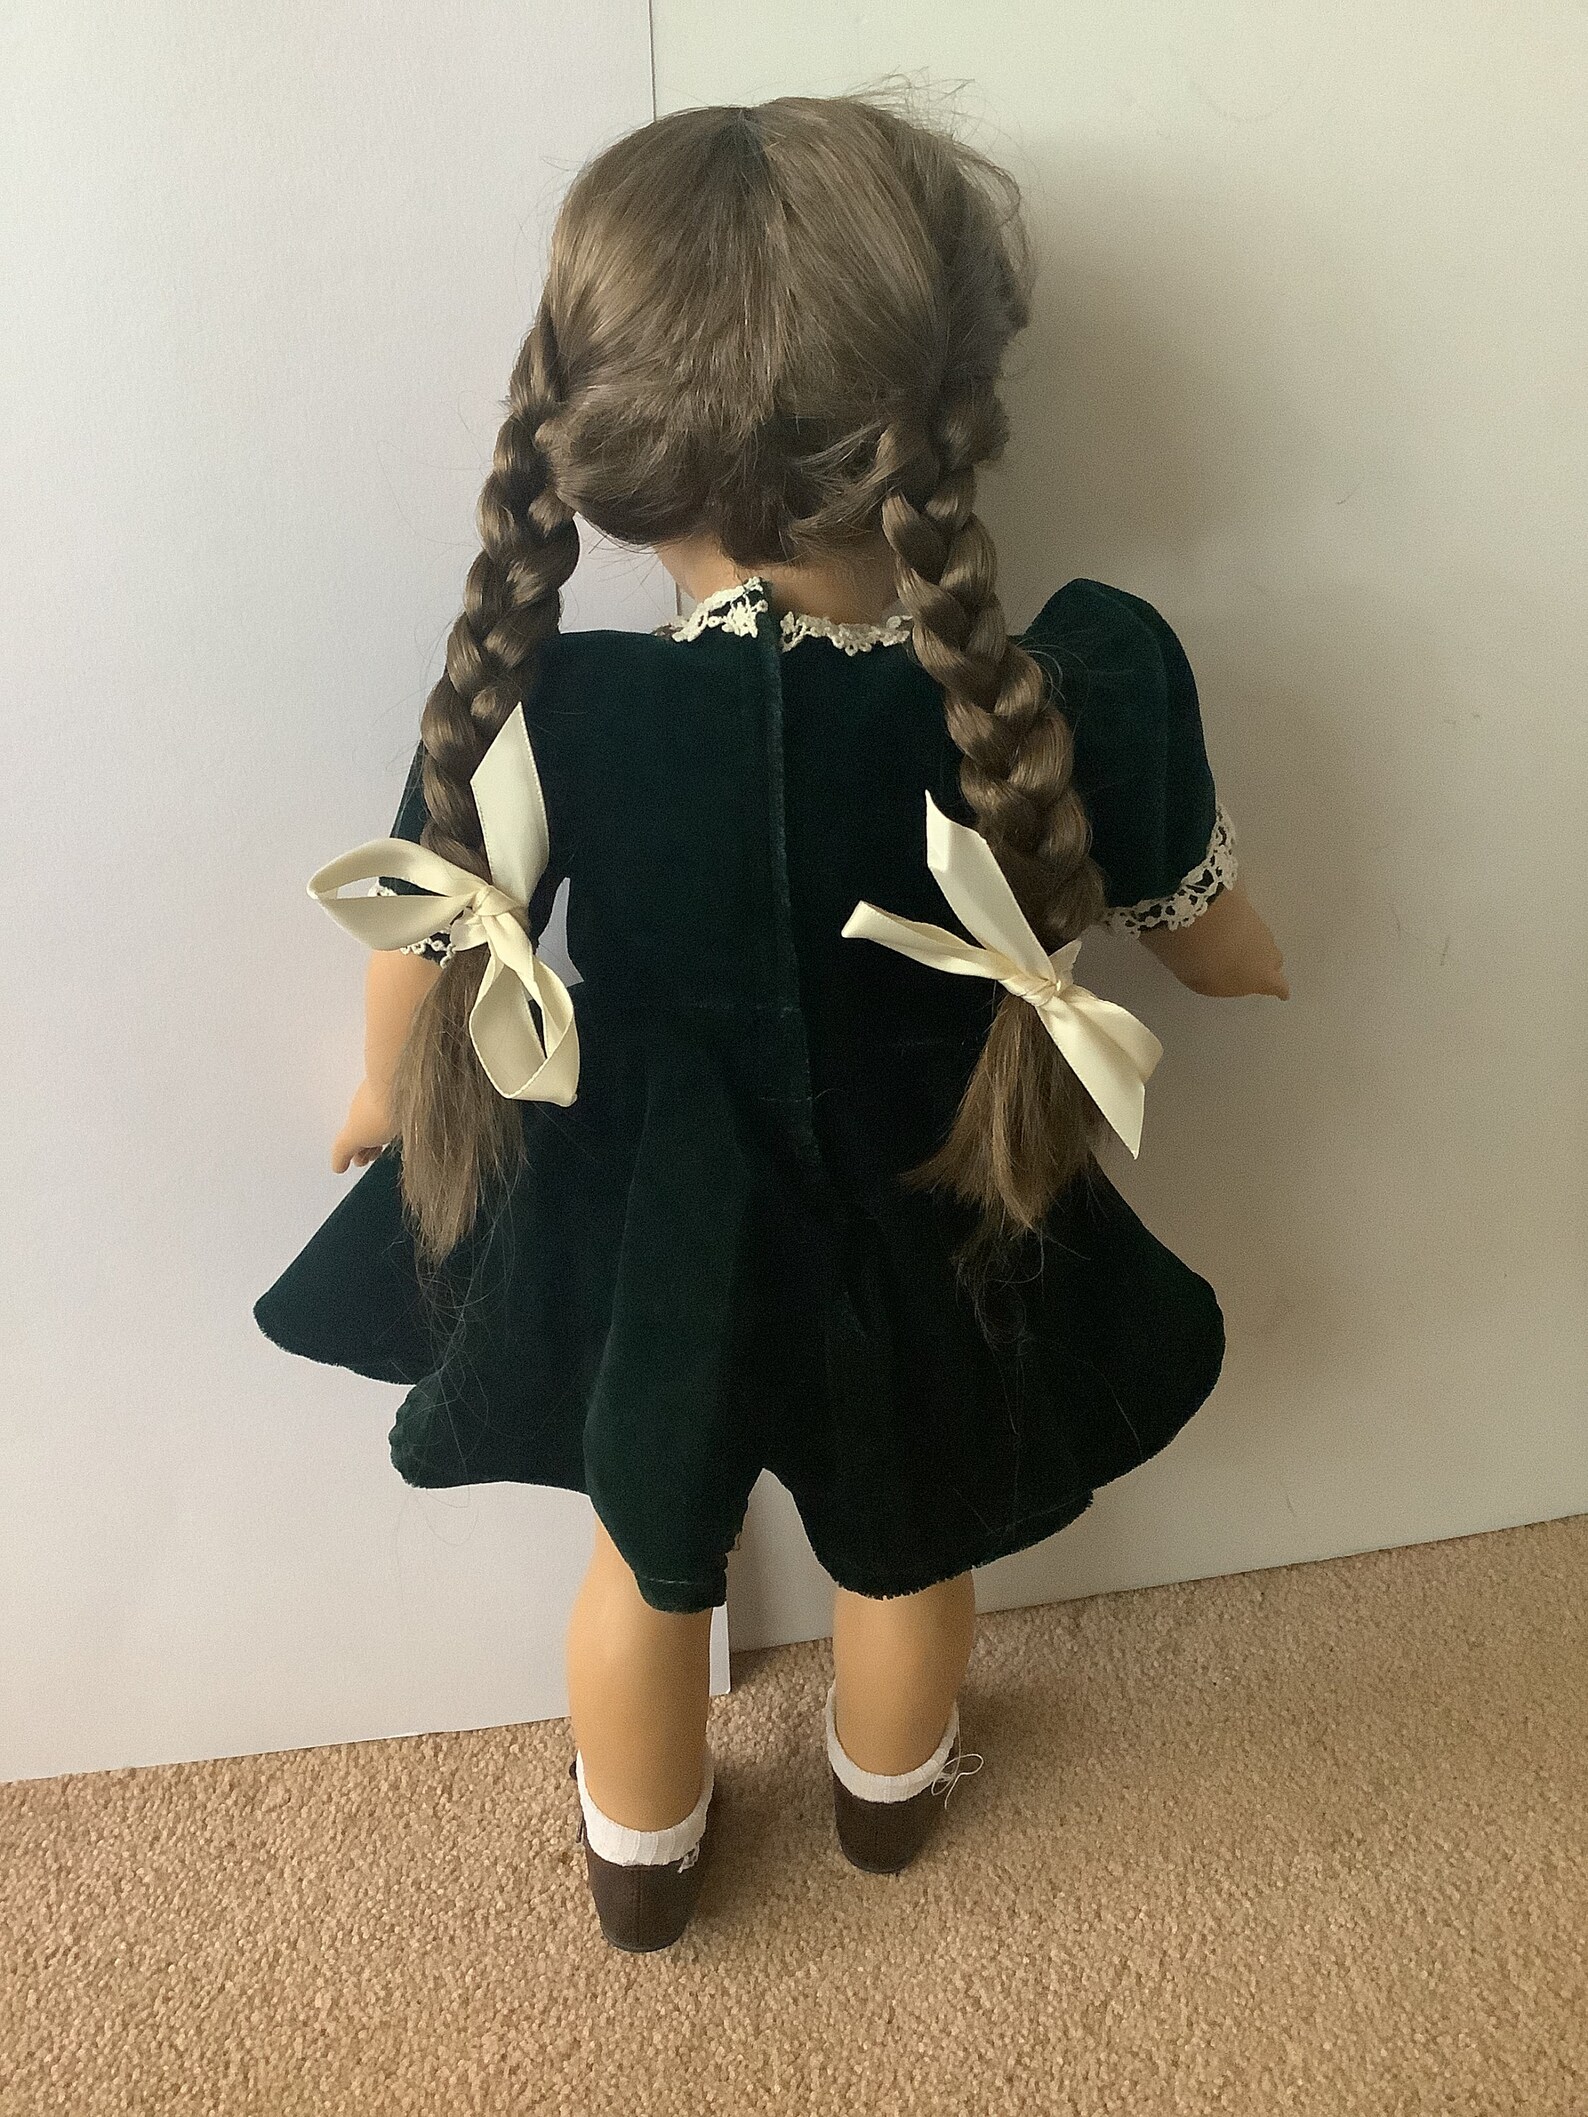 Pleasant Company American Girl Molly Mcintire 18 Doll With Outfits